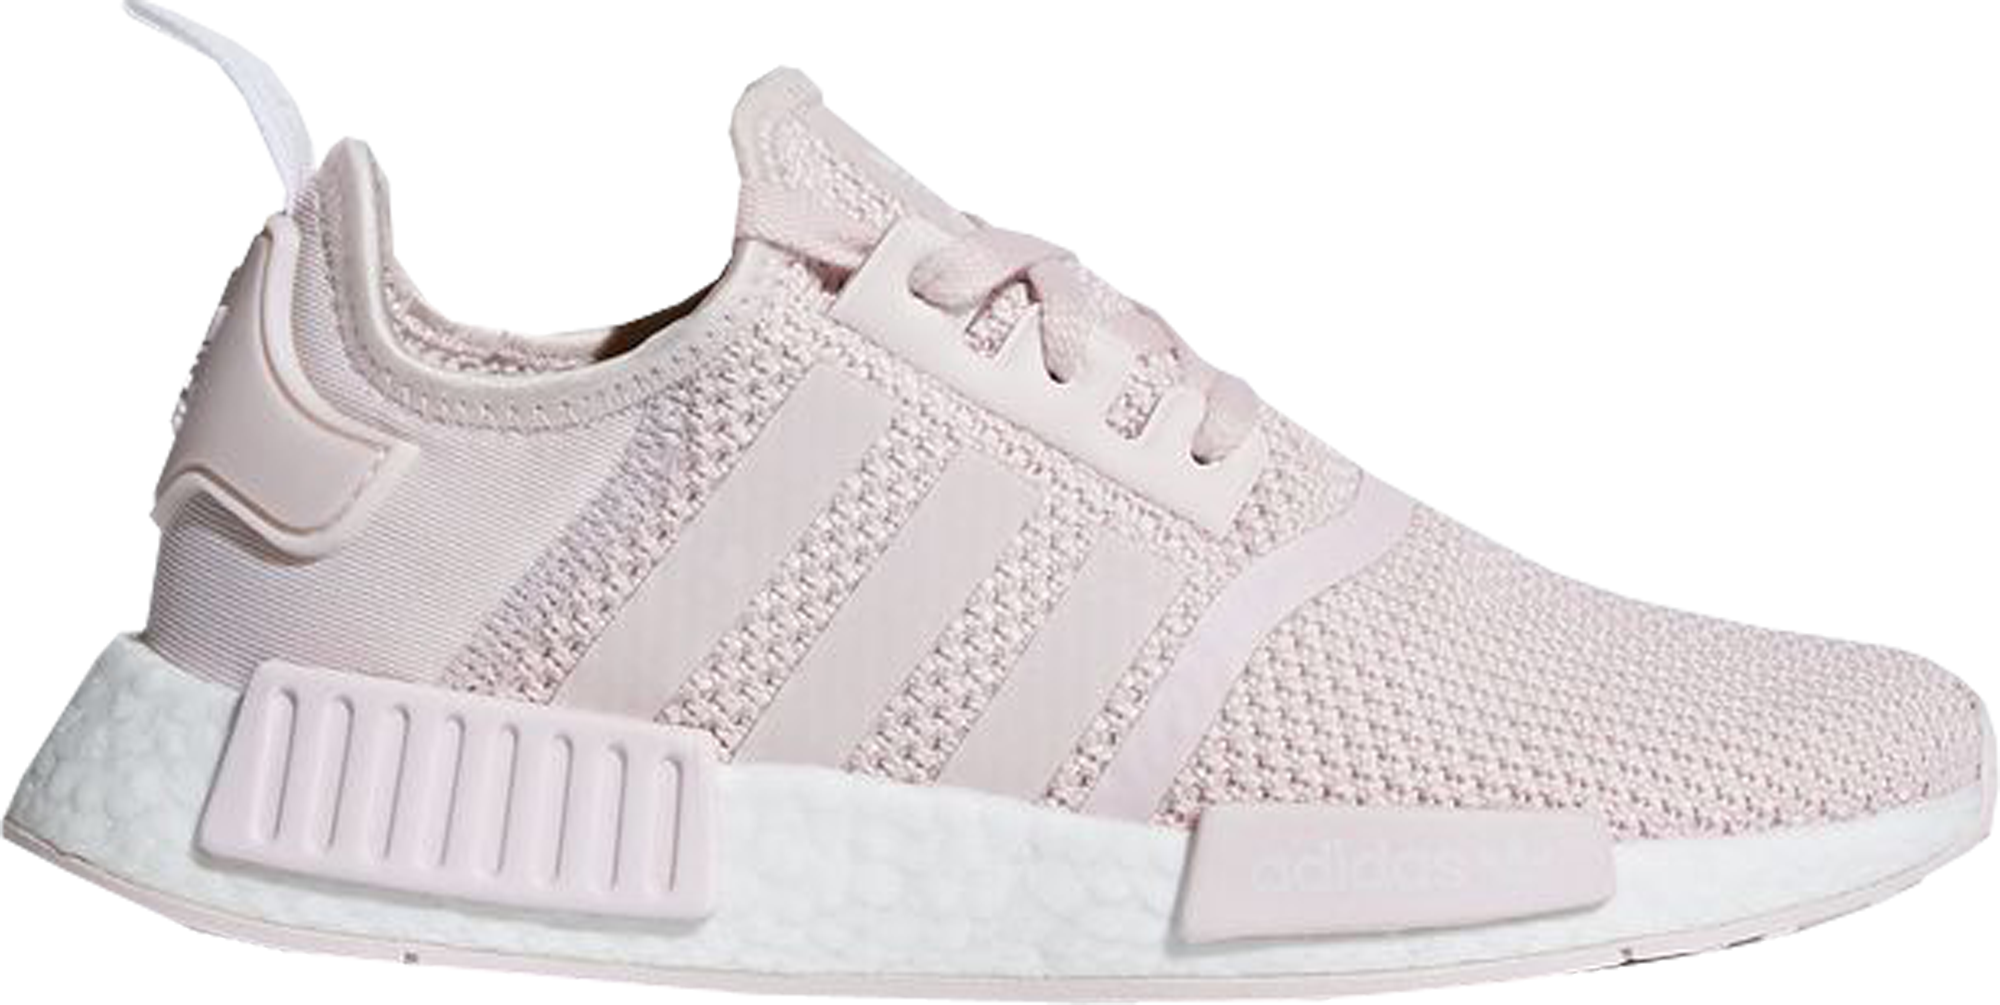 nmd orchid tint